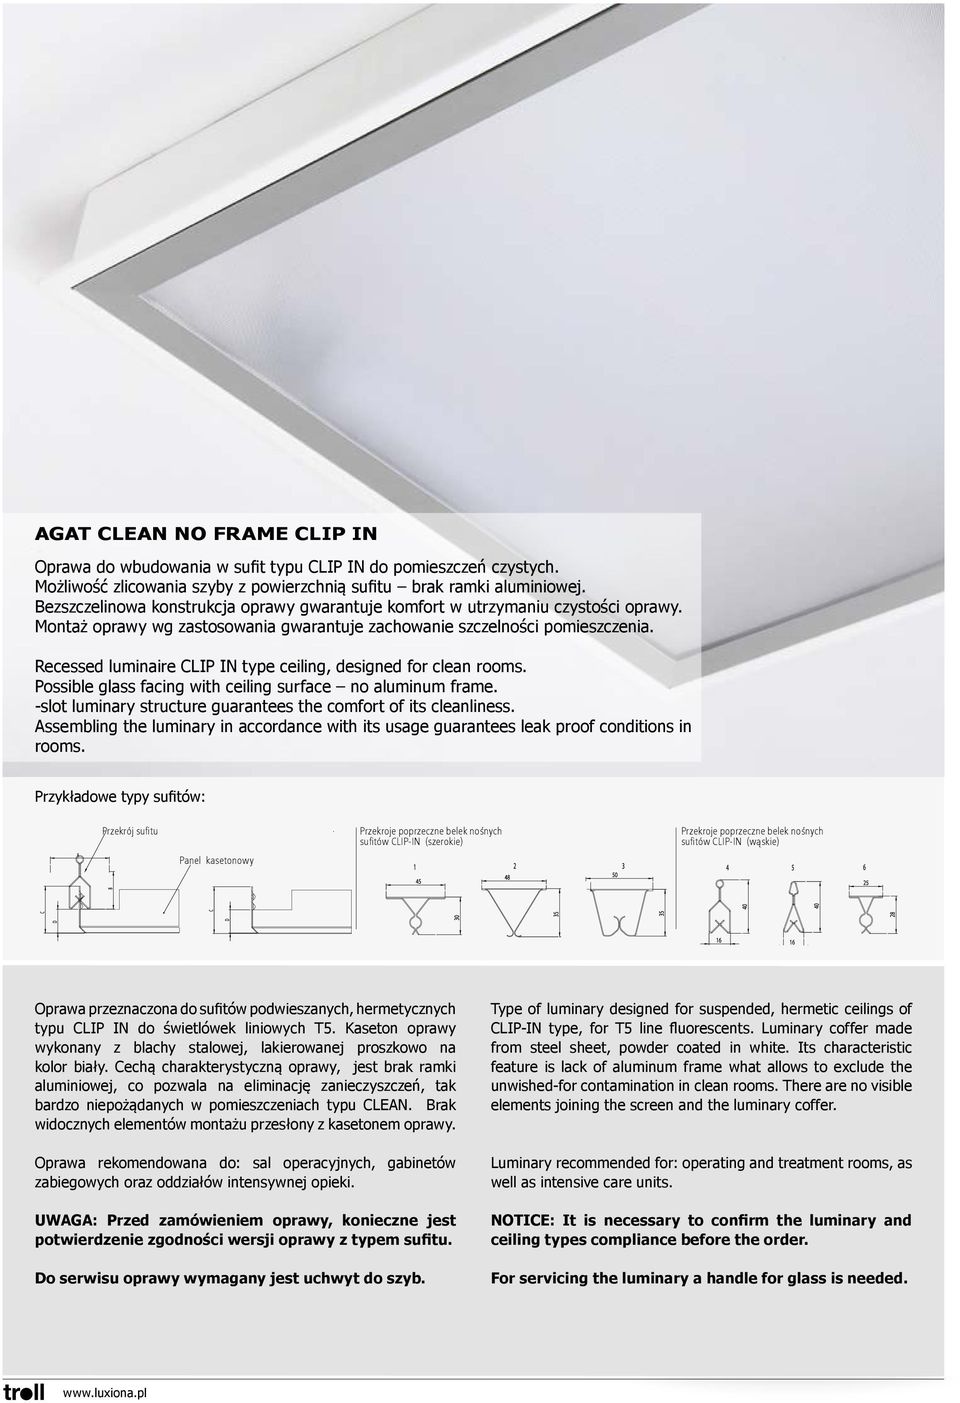 Recessed luminaire CLIP IN type ceiling, designed for clean rooms. Possible glass facing with ceiling surface no aluminum frame. -slot luminary structure guarantees the comfort of its cleanliness.